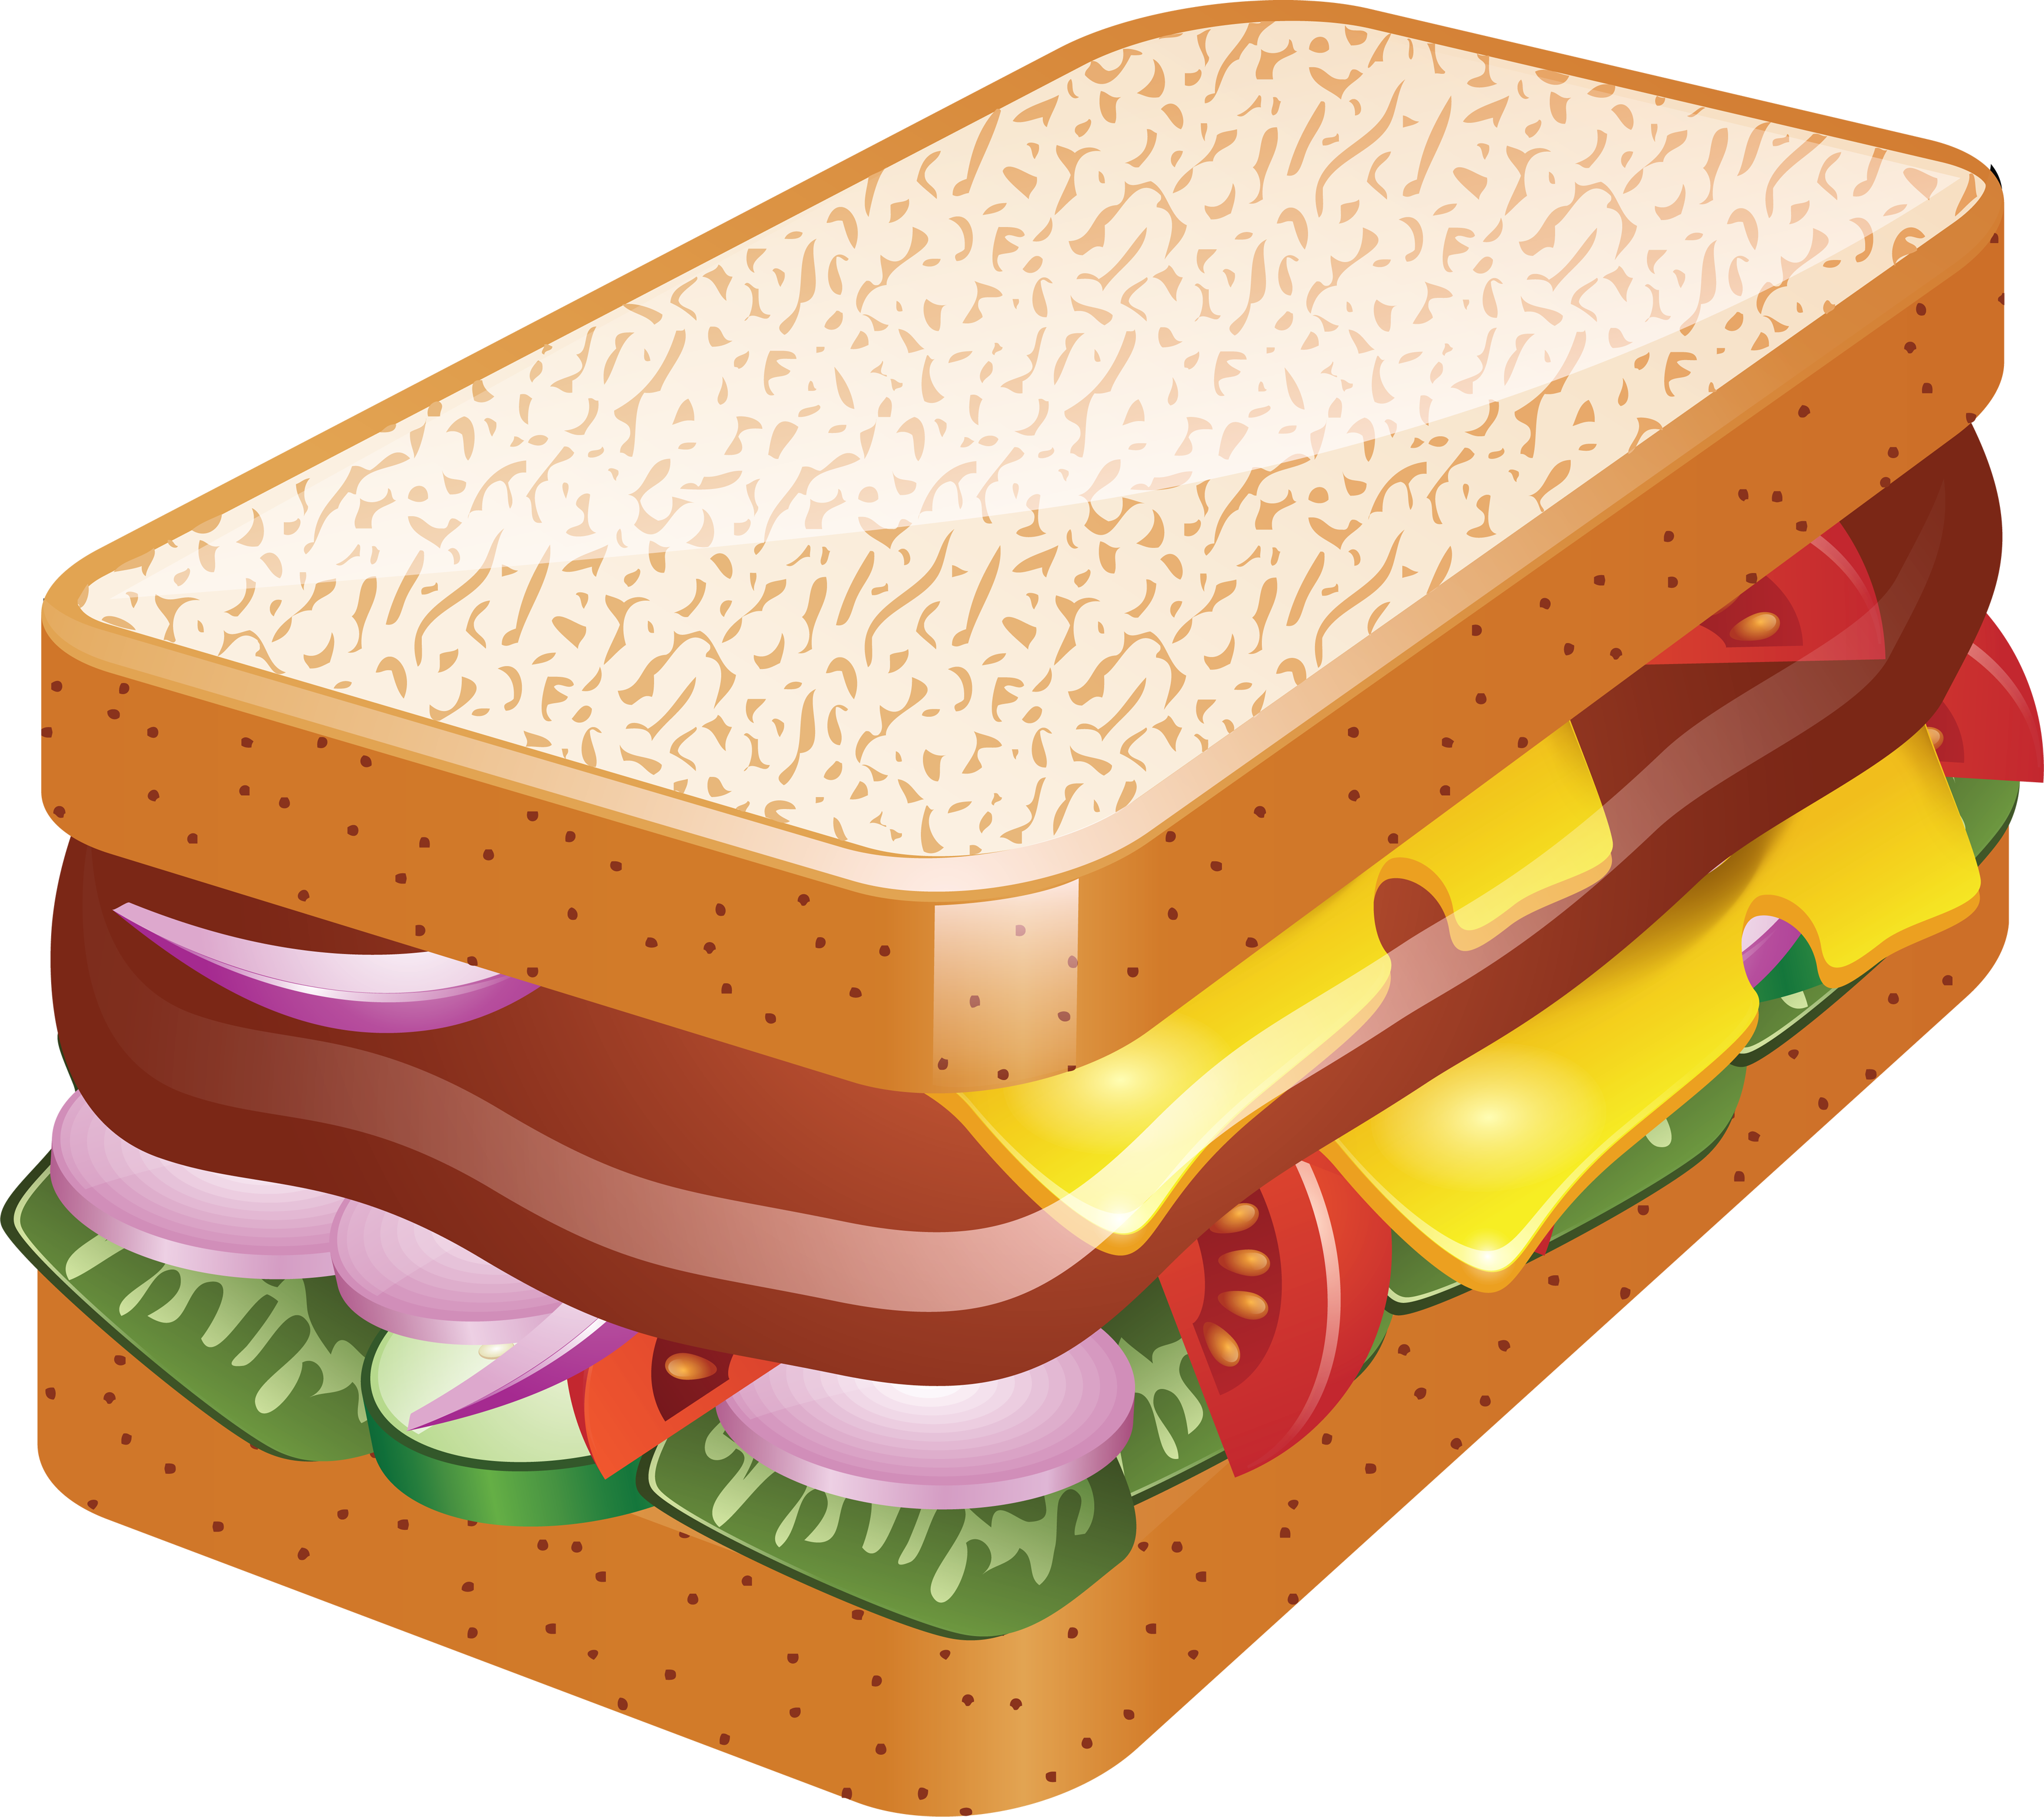 Burger and sandwich PNG image download pictures 